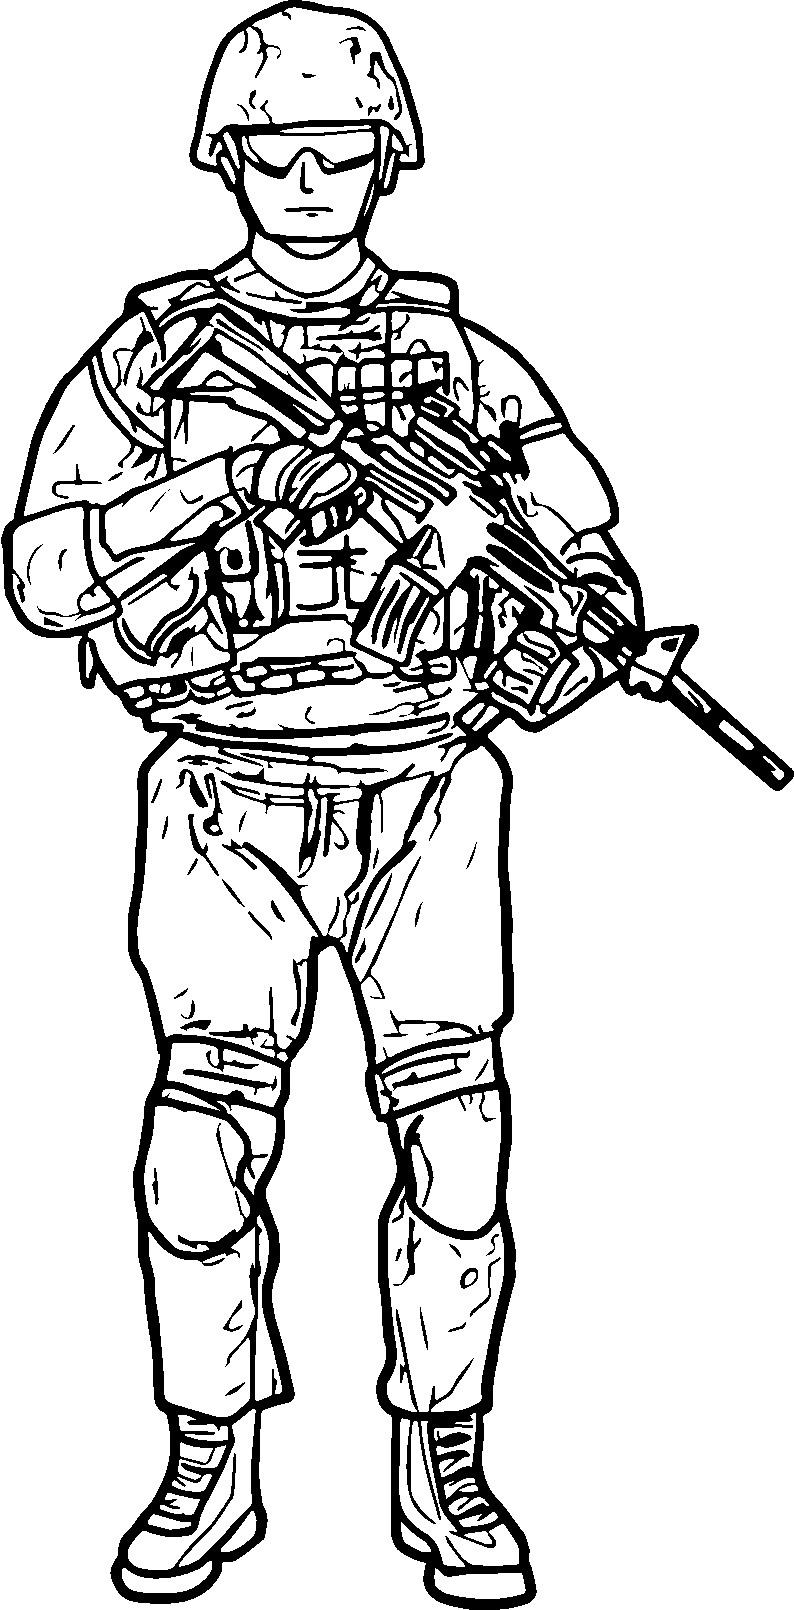 Preschool Coloring Sheets Of Soldiers
 British Sol r Coloring Pages